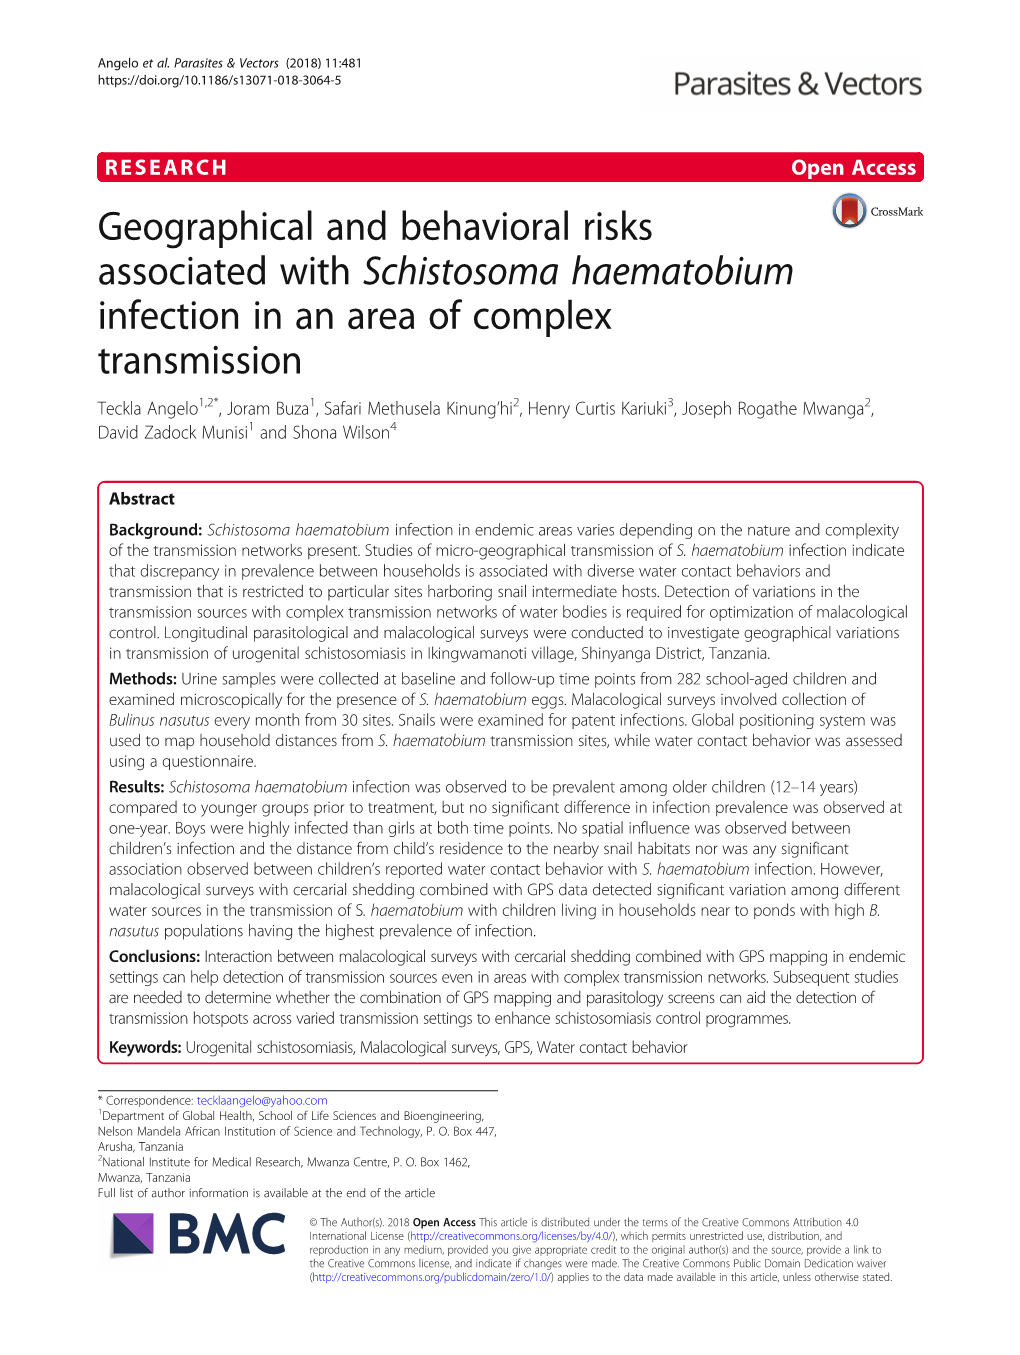 Geographical and Behavioral Risks Associated with Schistosoma Haematobium Infection in an Area of Complex Transmission